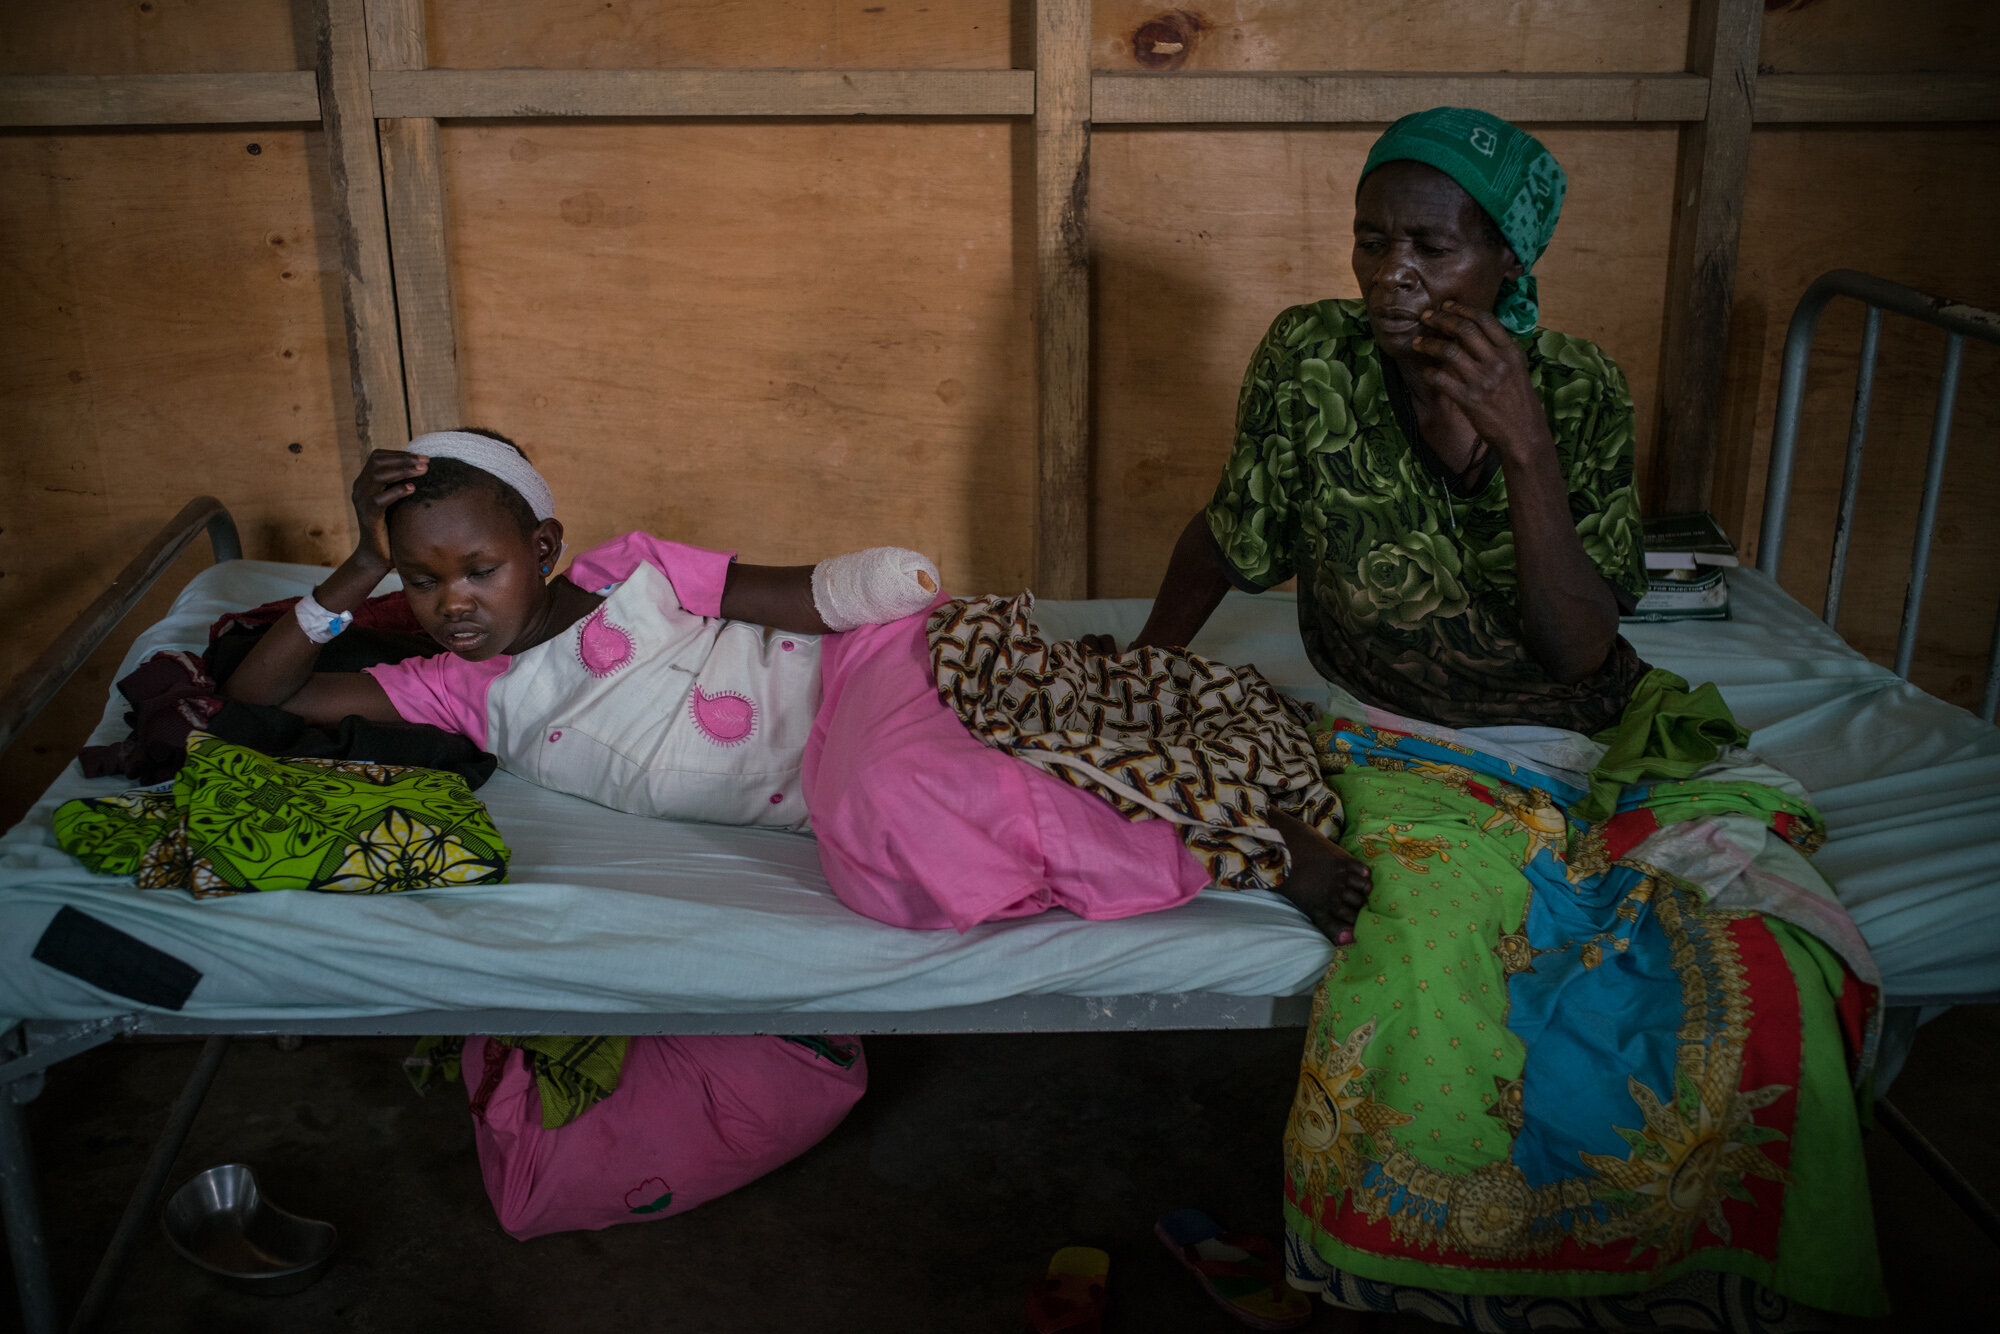  Grace Mave, 12, barely survived the attack on her village, Tche, 75 km north of Bunia, on February 11. Militias attacked in the morning at 10 AM. Grace watched as they raped her pregnant mother and used a machete to cut open her belly and remove the